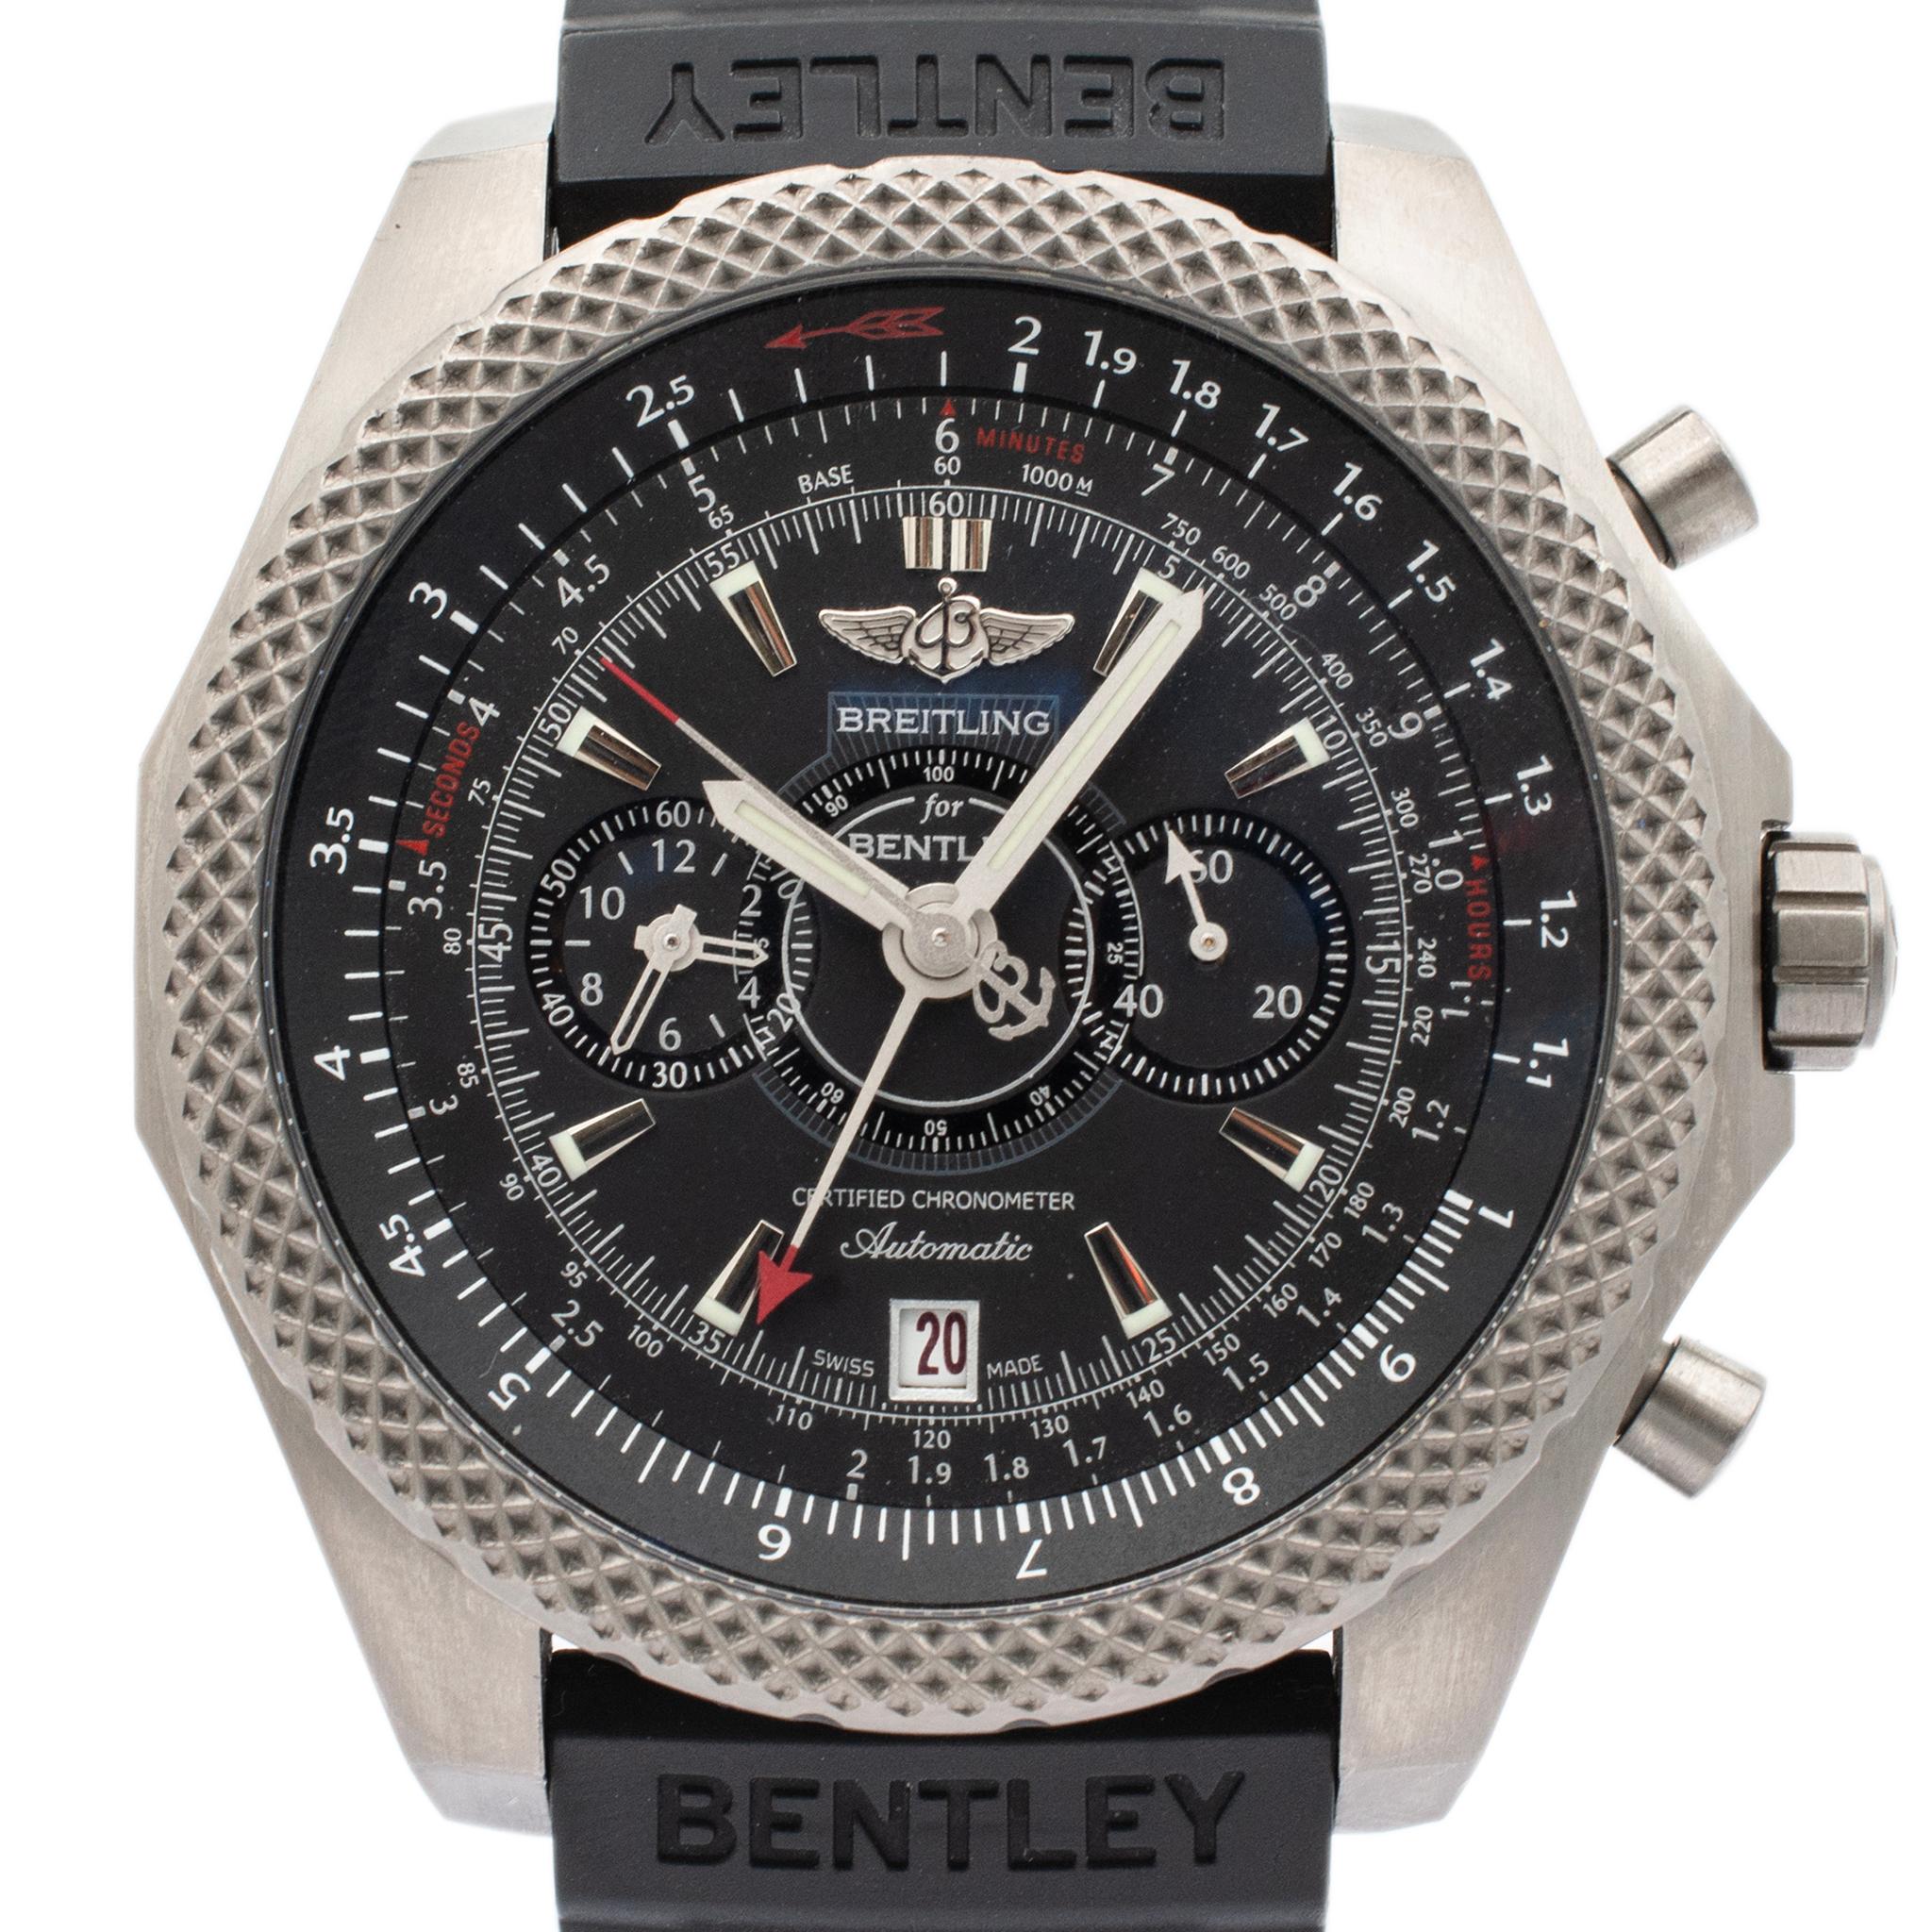 Brand:  Breitling

Band: Adjustable

Strap Length: 6.75 inches

Strap Width: 24.0mm

Weight: 143.67 grams

Gent's titanium B  REITLING Swiss made watch with original box and papers.  The 